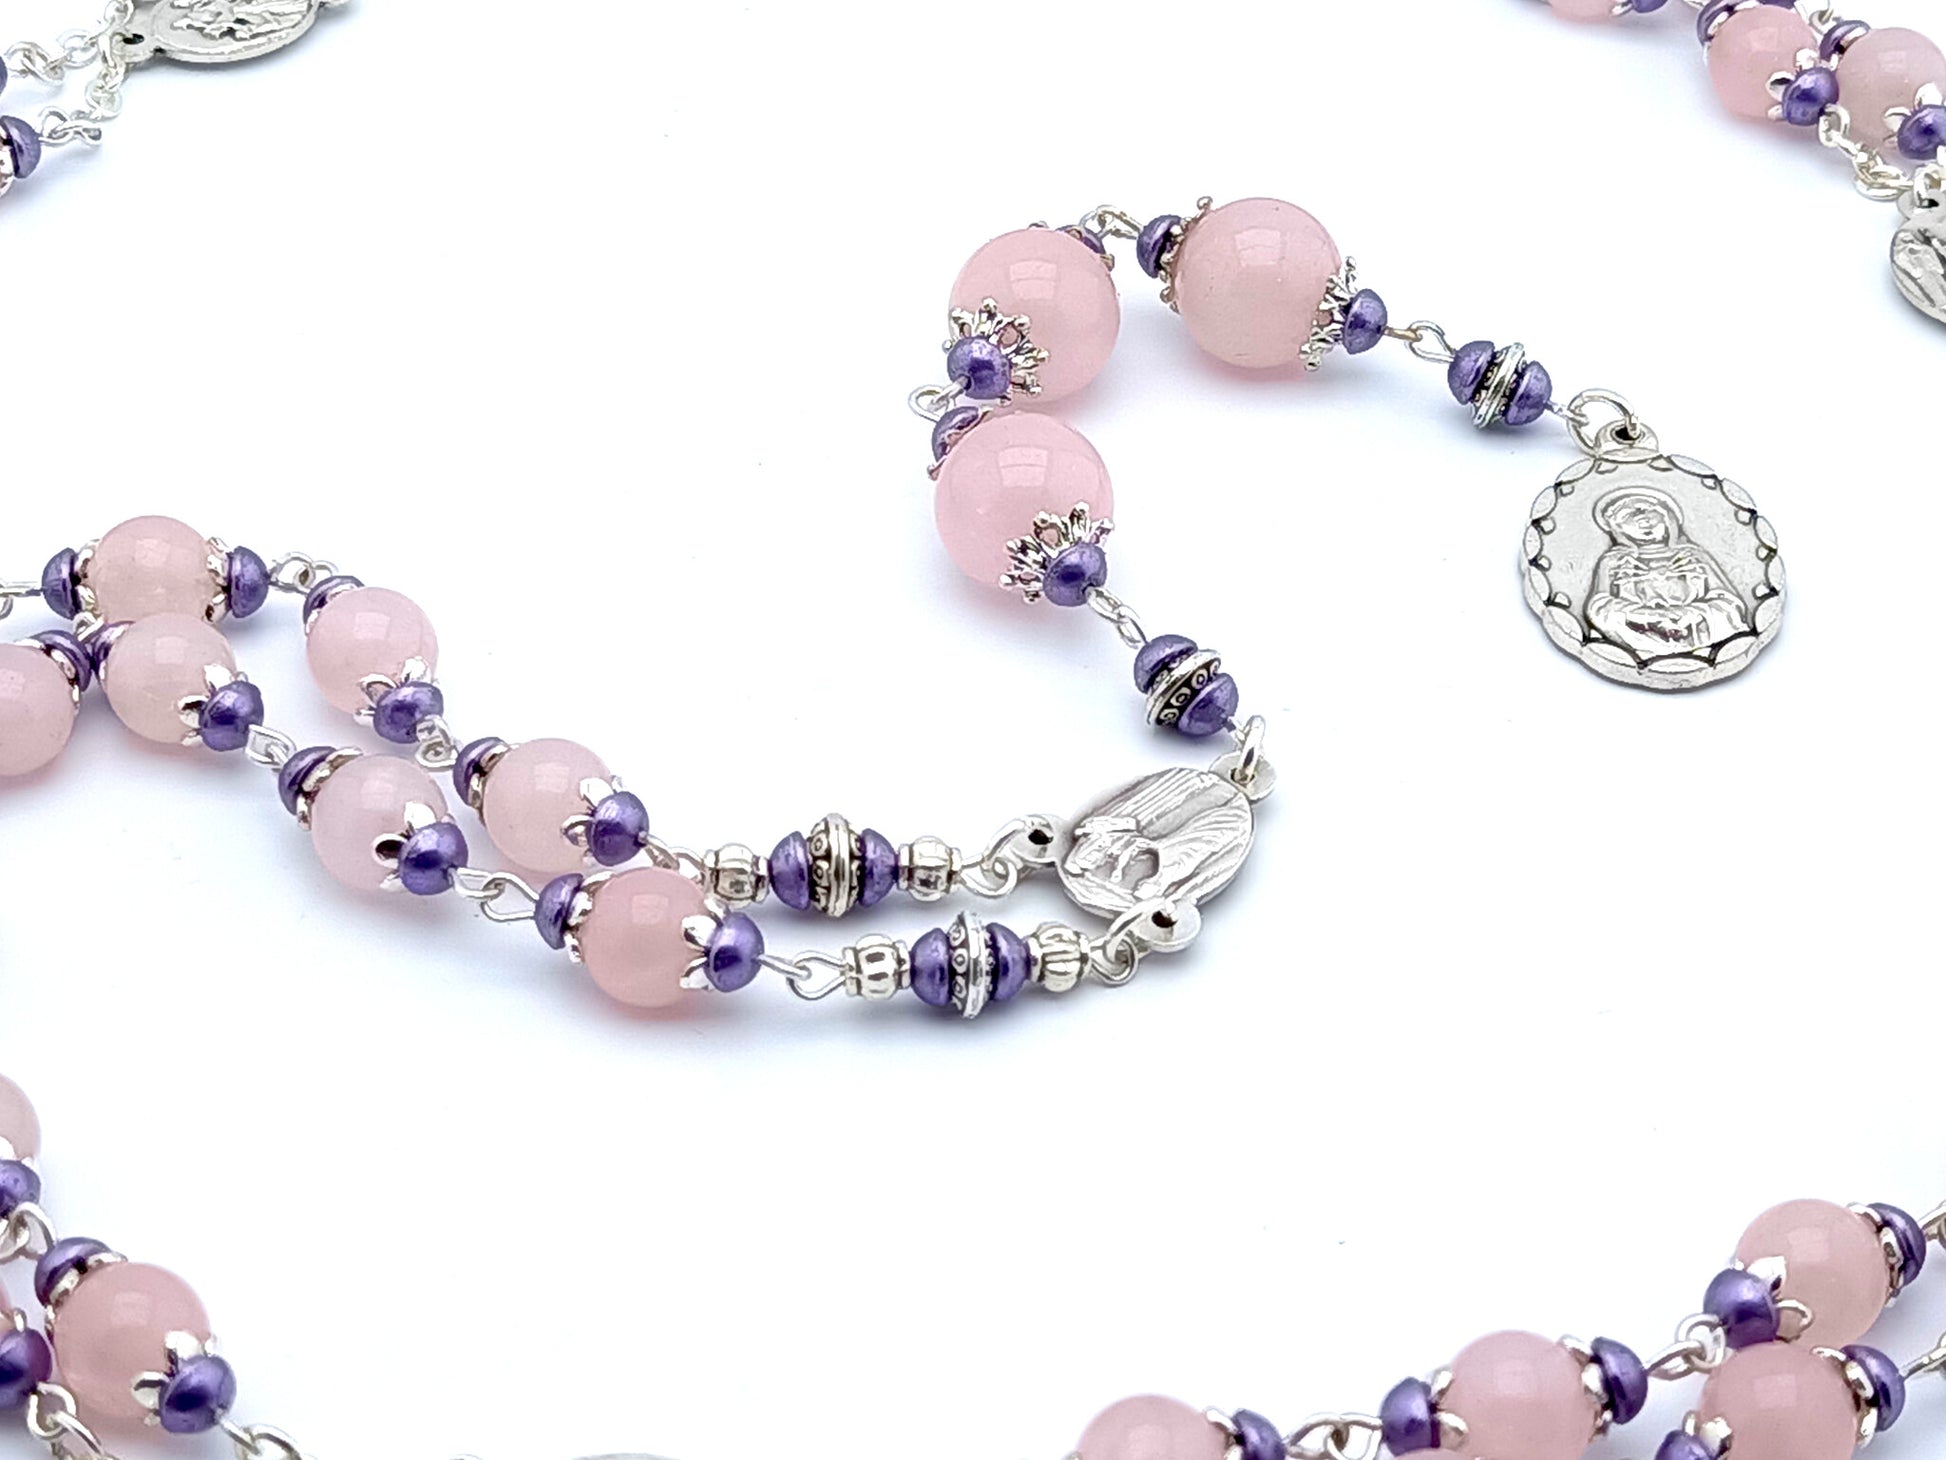 Our Lady of Sorrows unique dolor rosary beads with pale pink glass beads, silver dolour medals and purple bead caps. 